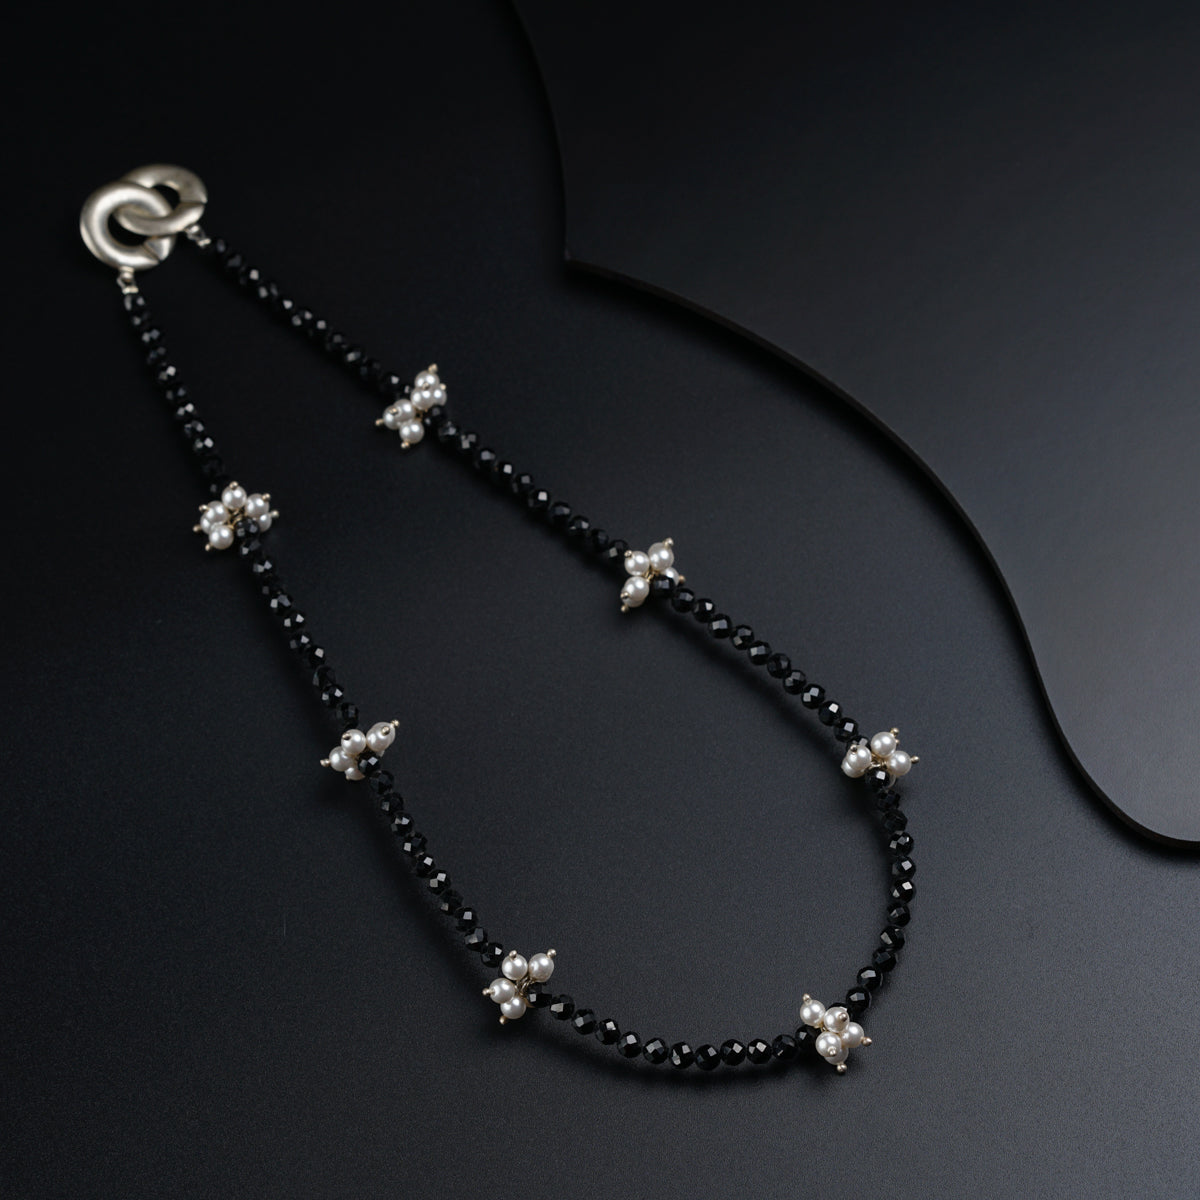 Black Spinel and Pearls Necklace